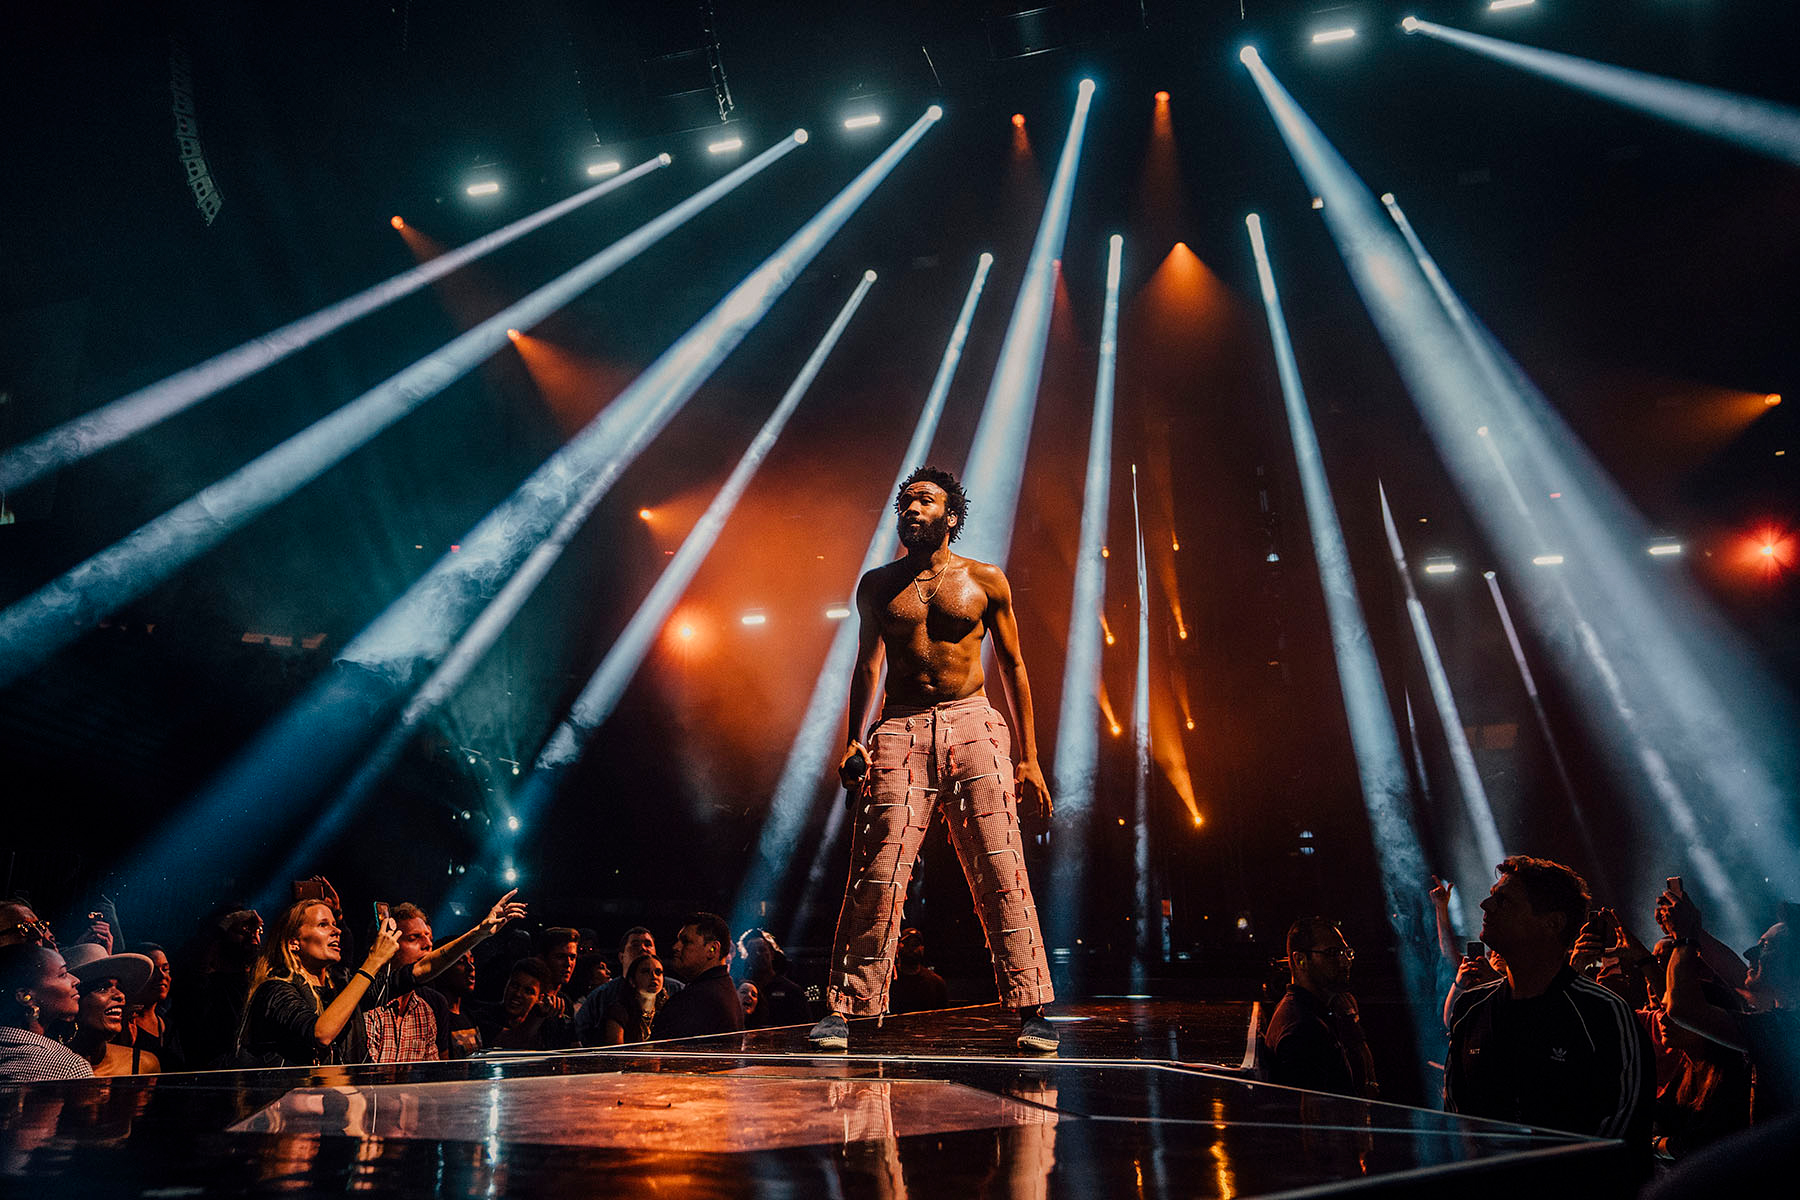 L-ISA Brings Wide-Eared Wonder to Childish Gambino’s This Is America Tour﻿